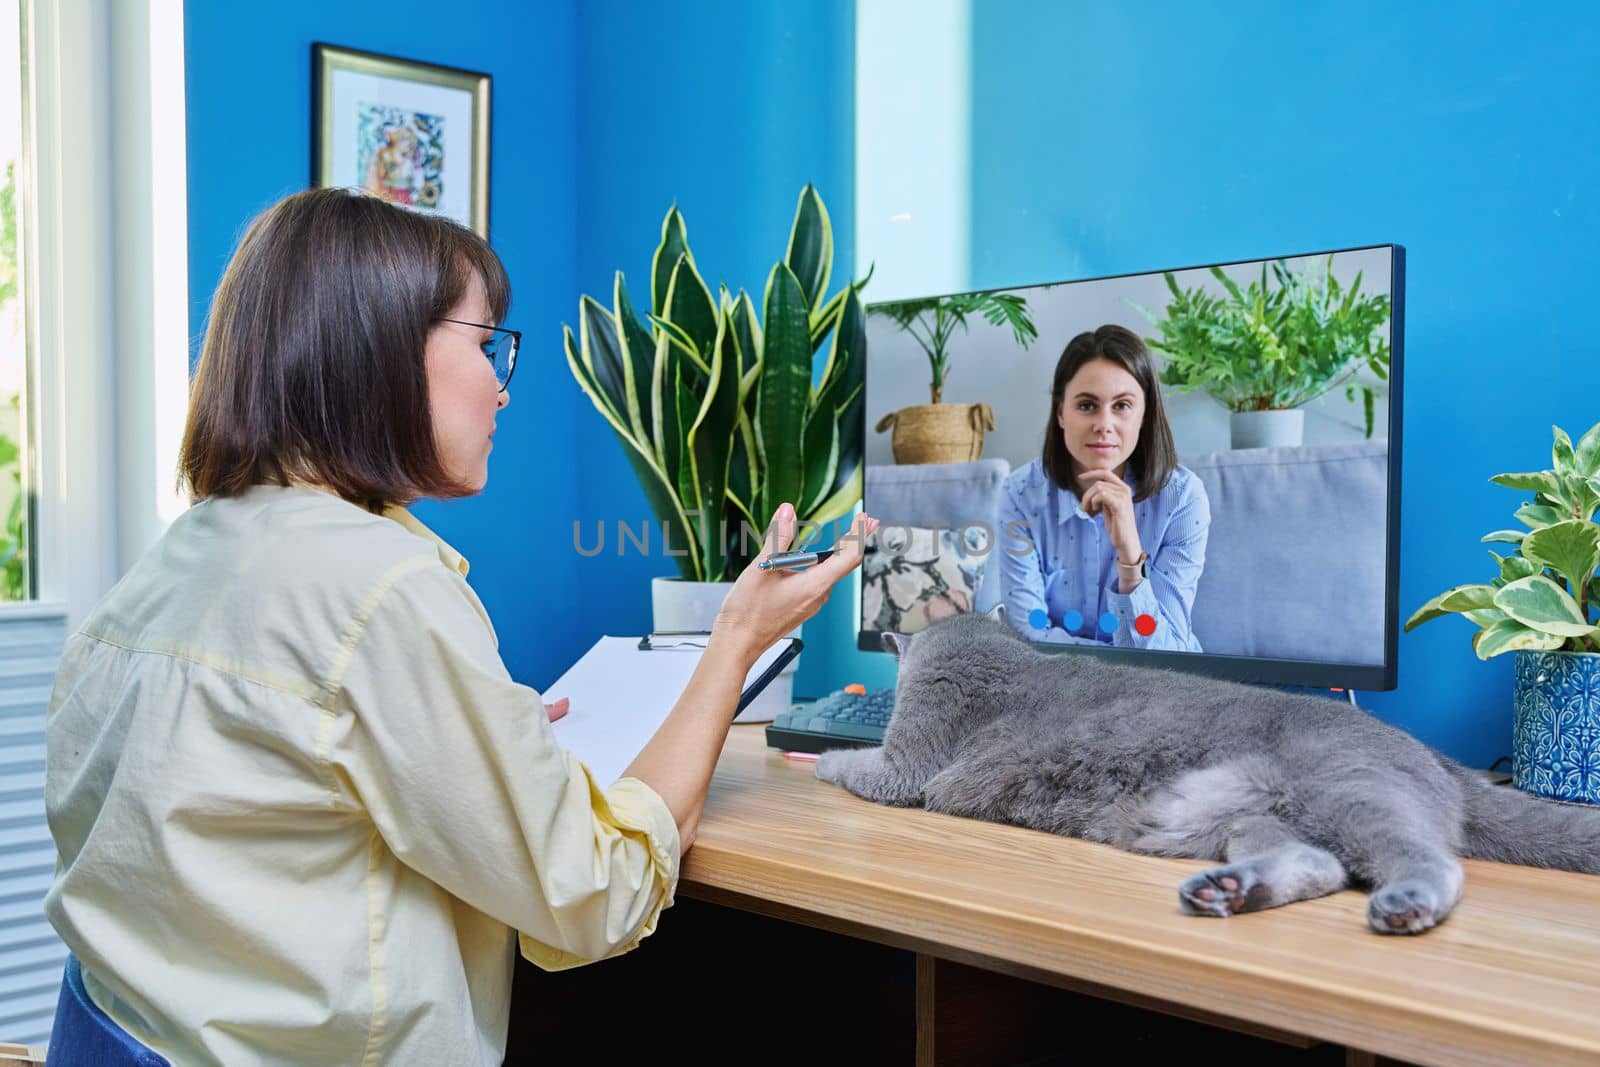 Middle aged woman having video conference call chat with young female on computer screen, in home office. Teacher, business coach, psychologist, therapist looking at webcam, virtual online meeting